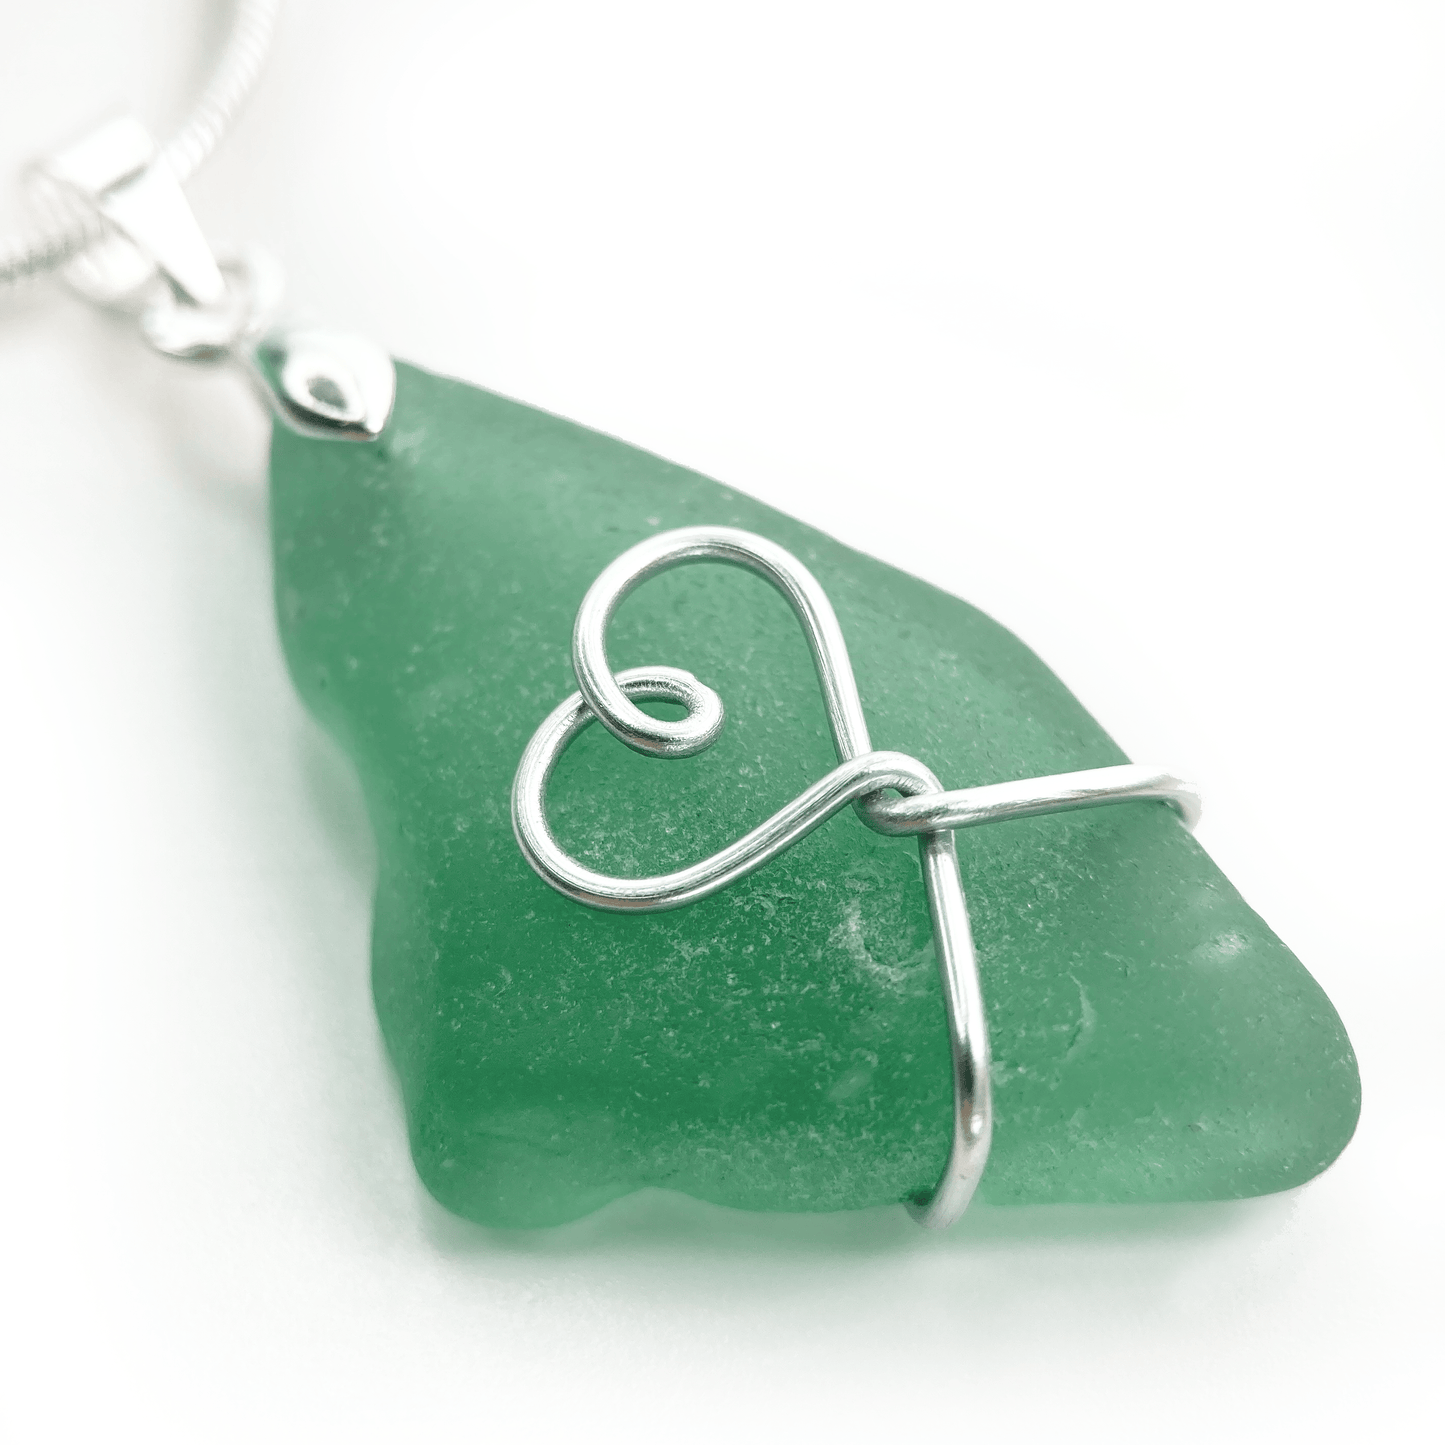 Sea Glass Pendant - Pale Green Heart Wire Wrapped Necklace - Scottish Silver Jewellery - East Neuk Beach Crafts